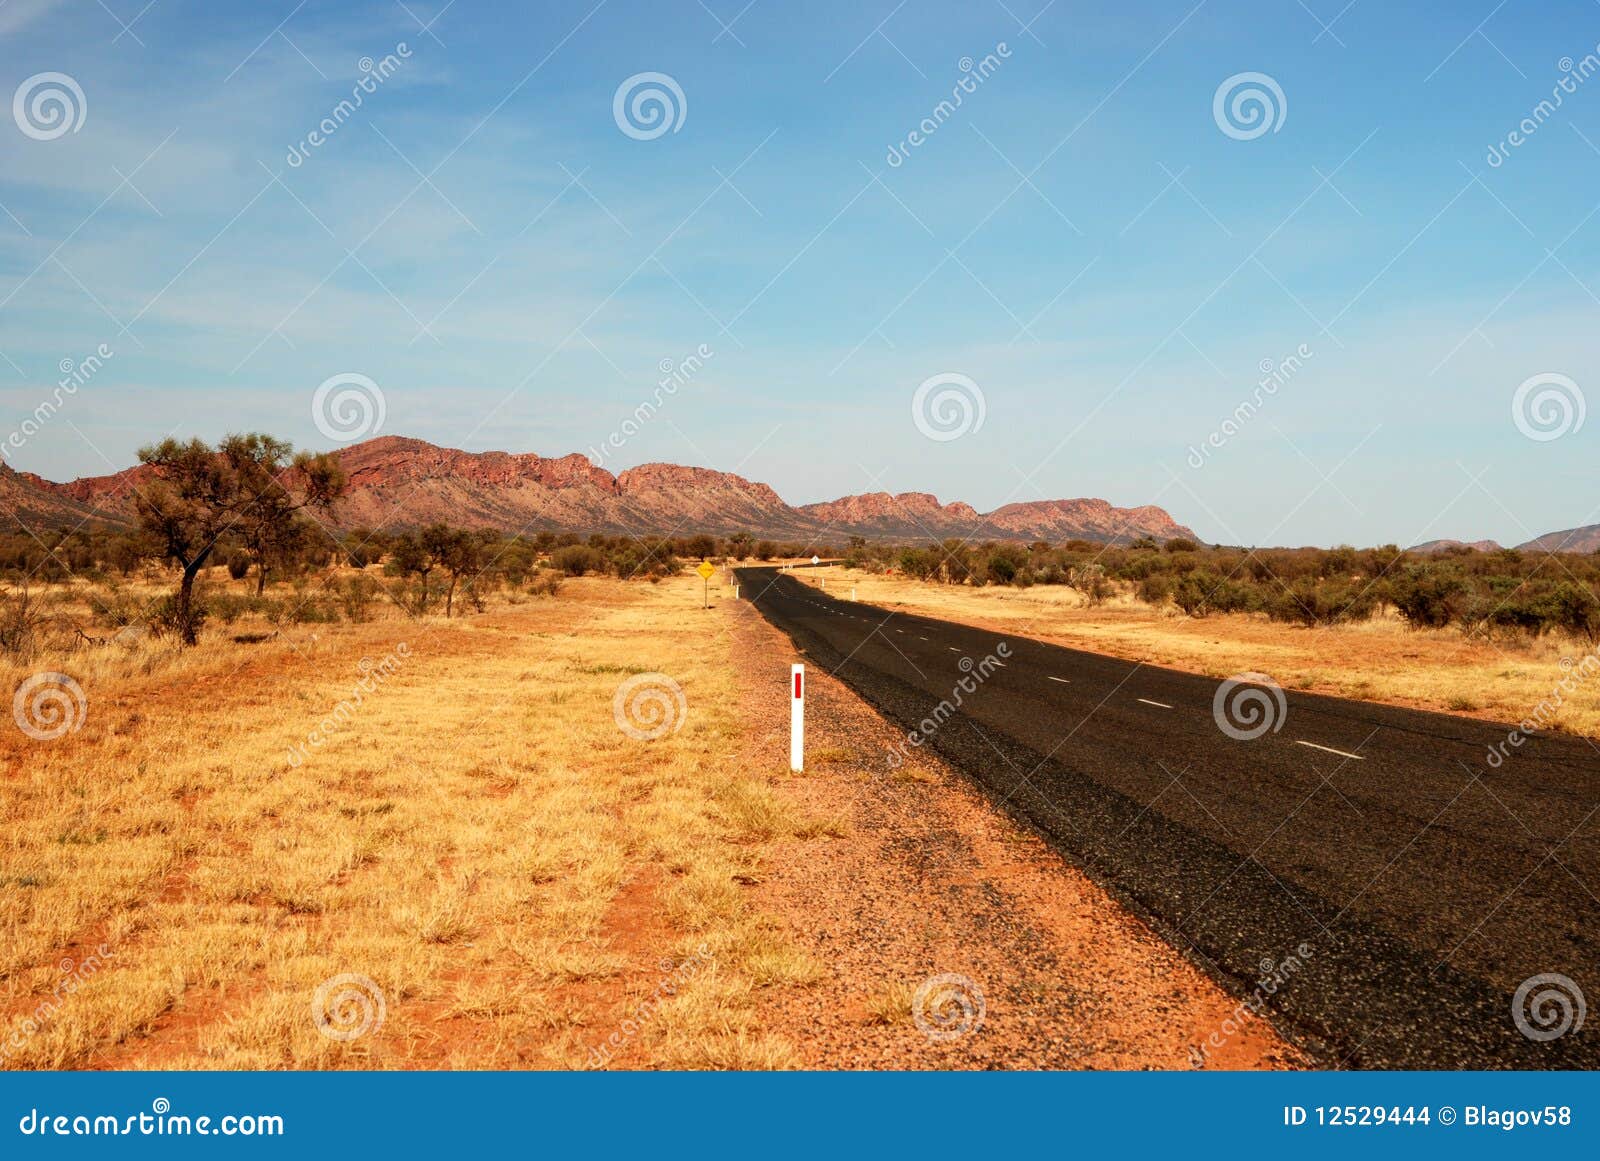 macdonnell ranges road